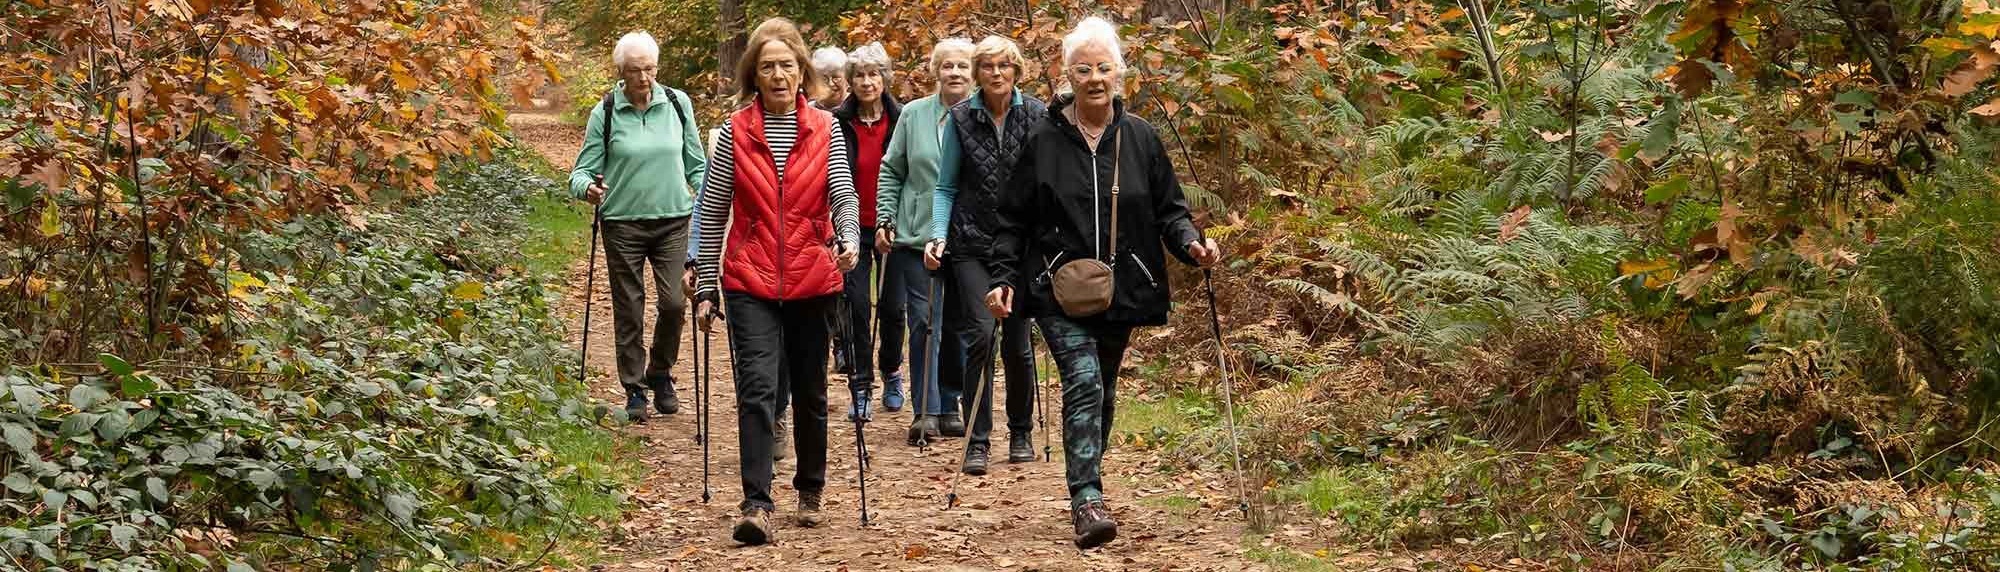 Stichting WIJ - Fit for Life Nordic Walking